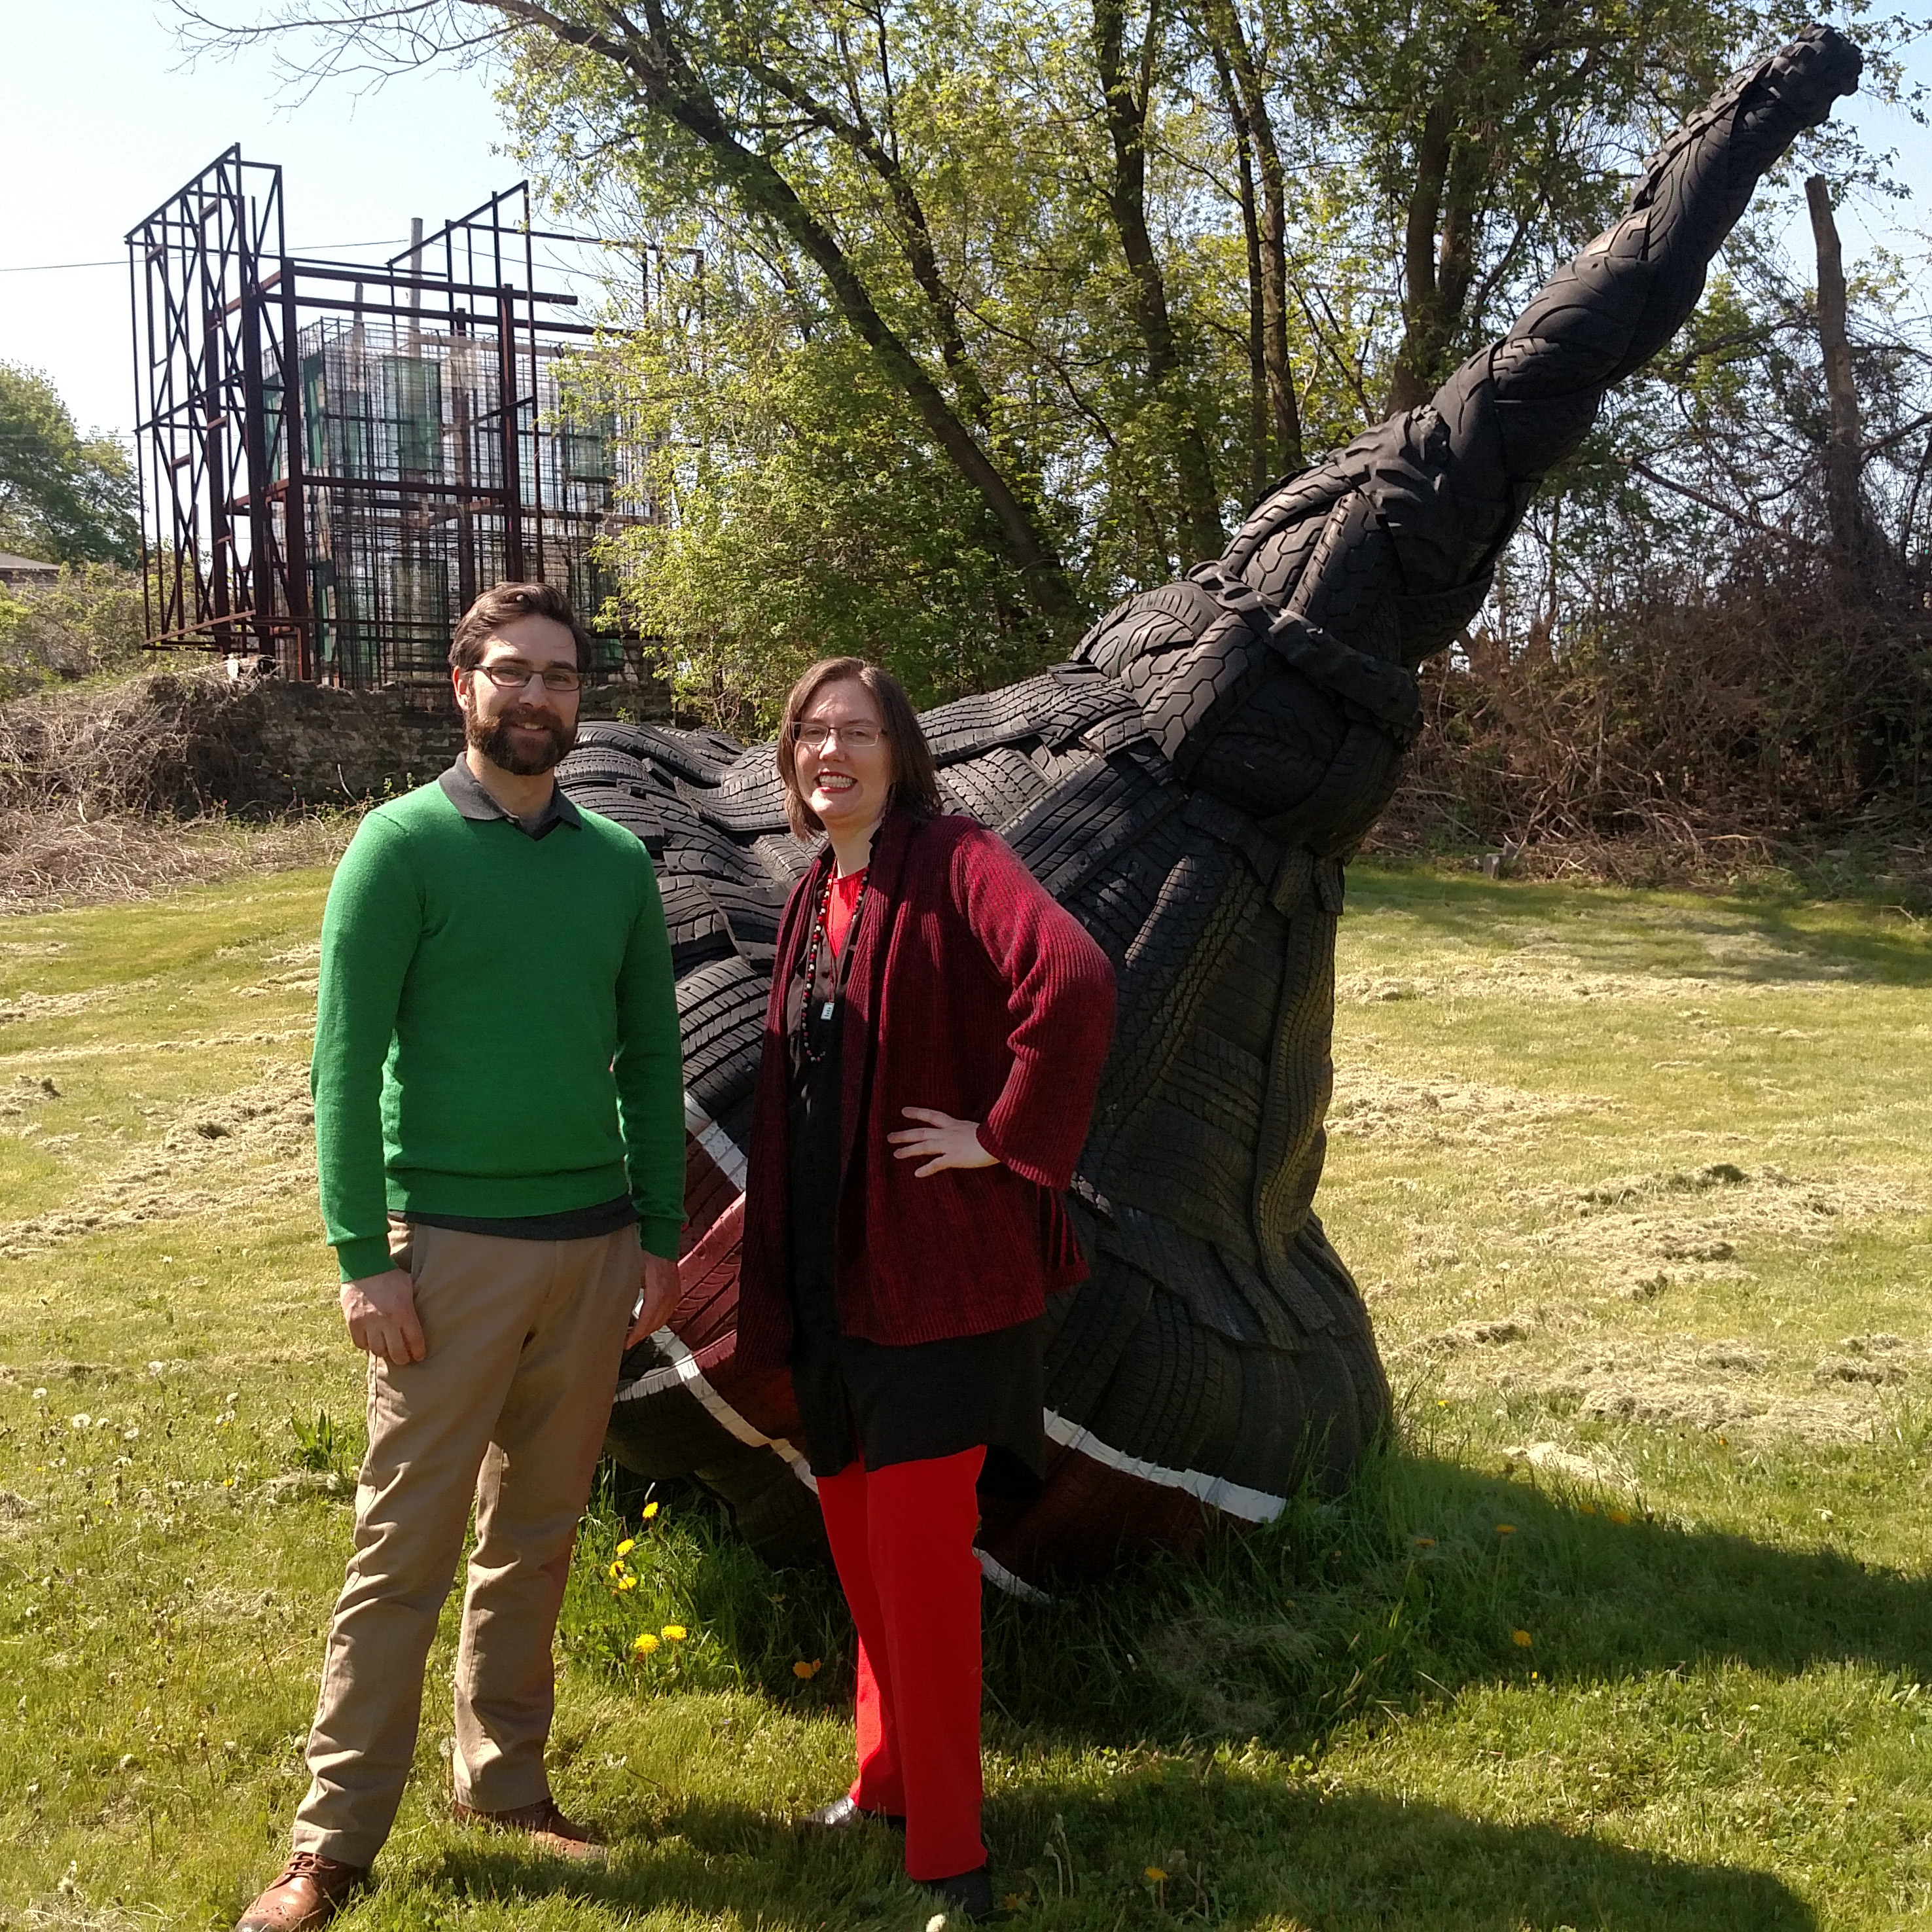 ArtOneida team members Marc-Anthony Polizzi and Arden Kirkland in the yard at Sculpture Space with Top by Anssi Taulu, with Translucent Home by Ann Reichlin in the background